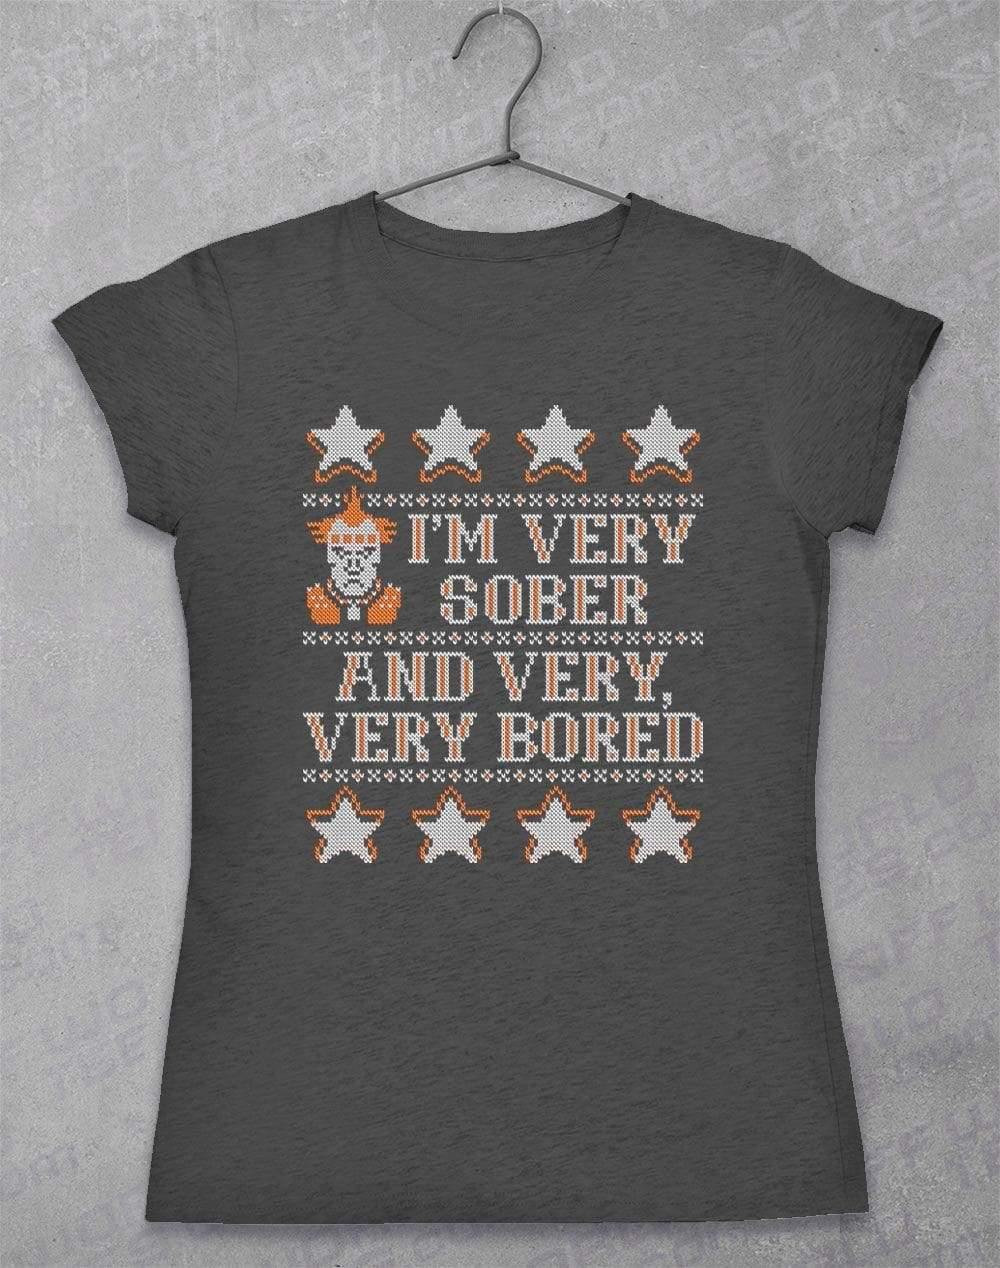 I'm Very Sober and Very Very Bored Festive Knitted-Look Women's T-Shirt 8-10 / Dark Heather  - Off World Tees